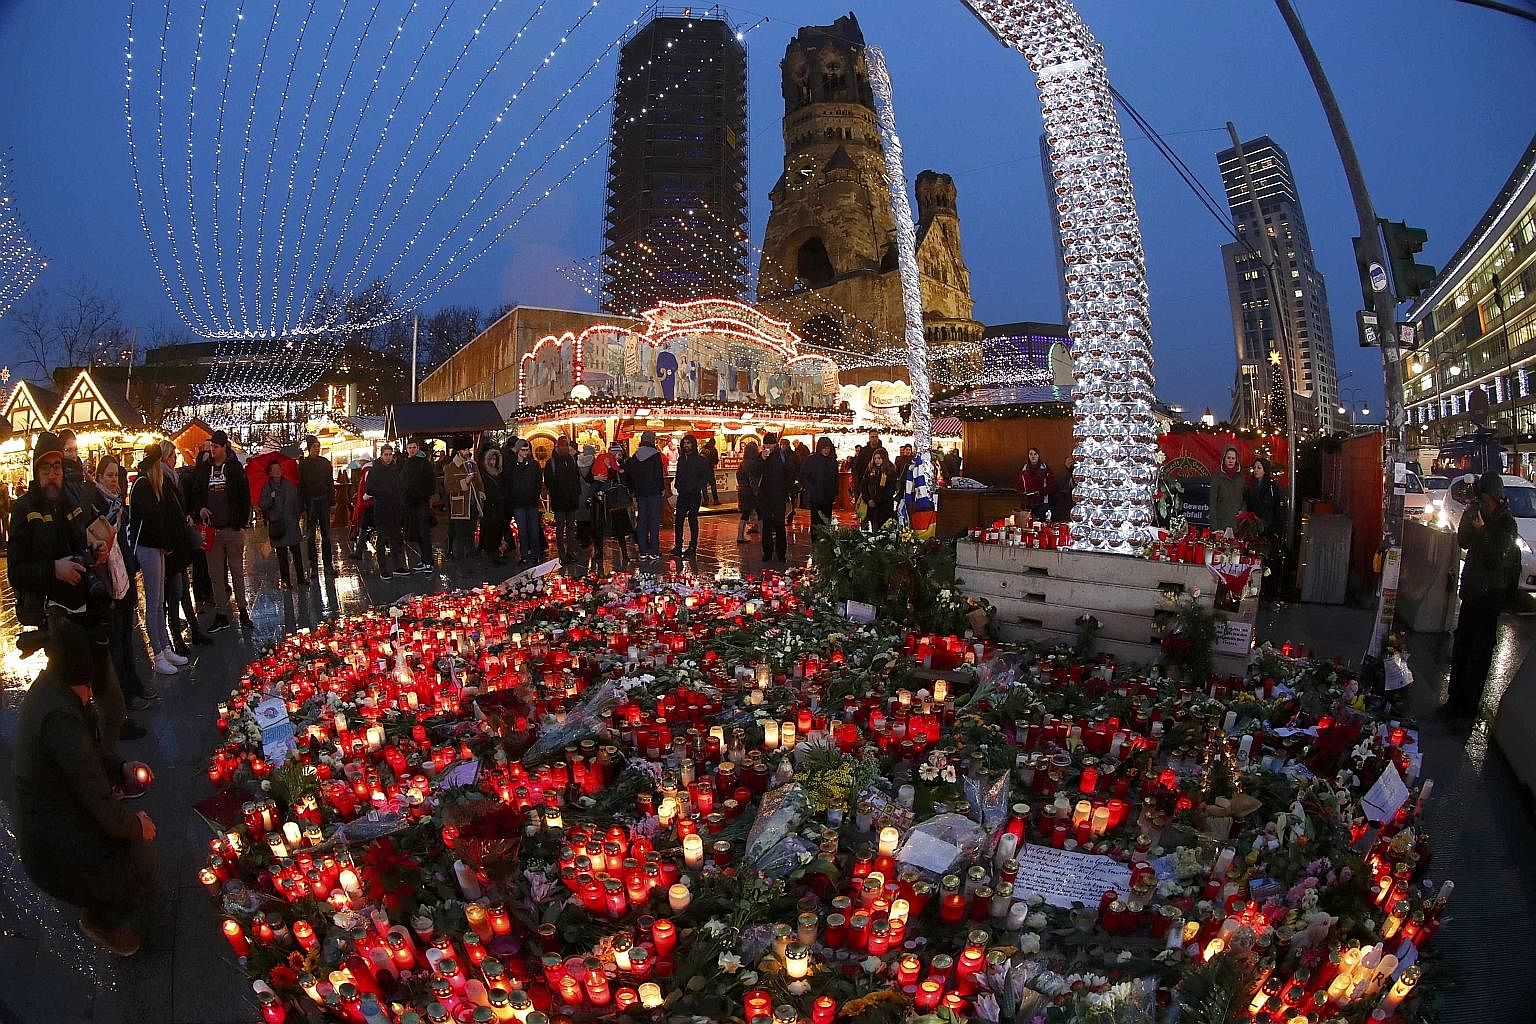 Flowers and candles near the Christmas market at Breitscheid square in Berlin following the Dec 19 truck attack. Anis Amri, who had driven a stolen truck through the crowd, was shot dead by police in Milan on Dec 23.